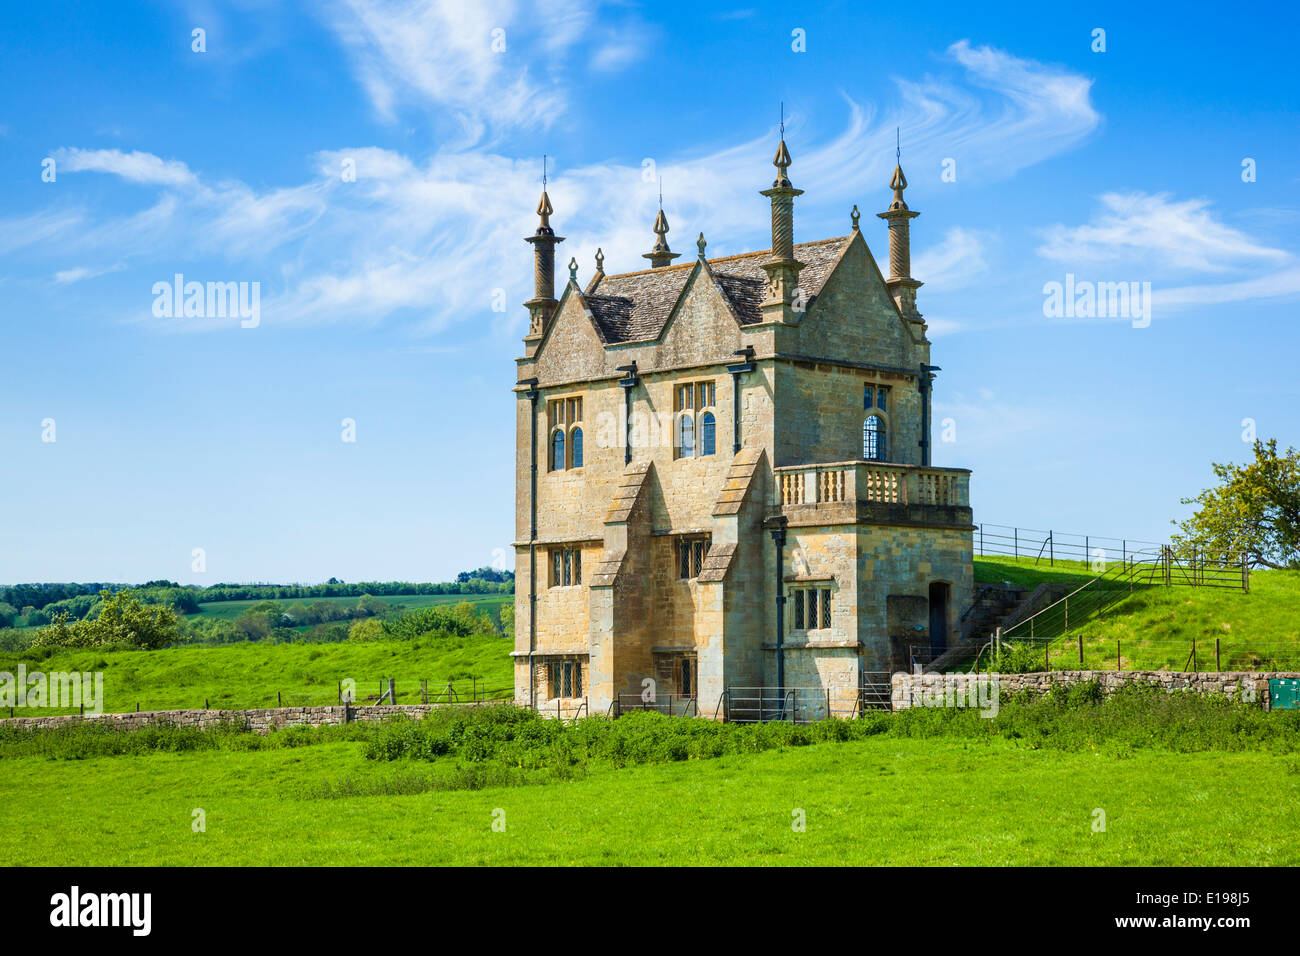 East Banqueting House Jacobean Lodge, Chipping Campden, Gloucestershire, Cotswolds, England, UK, EU, Europe Stock Photo